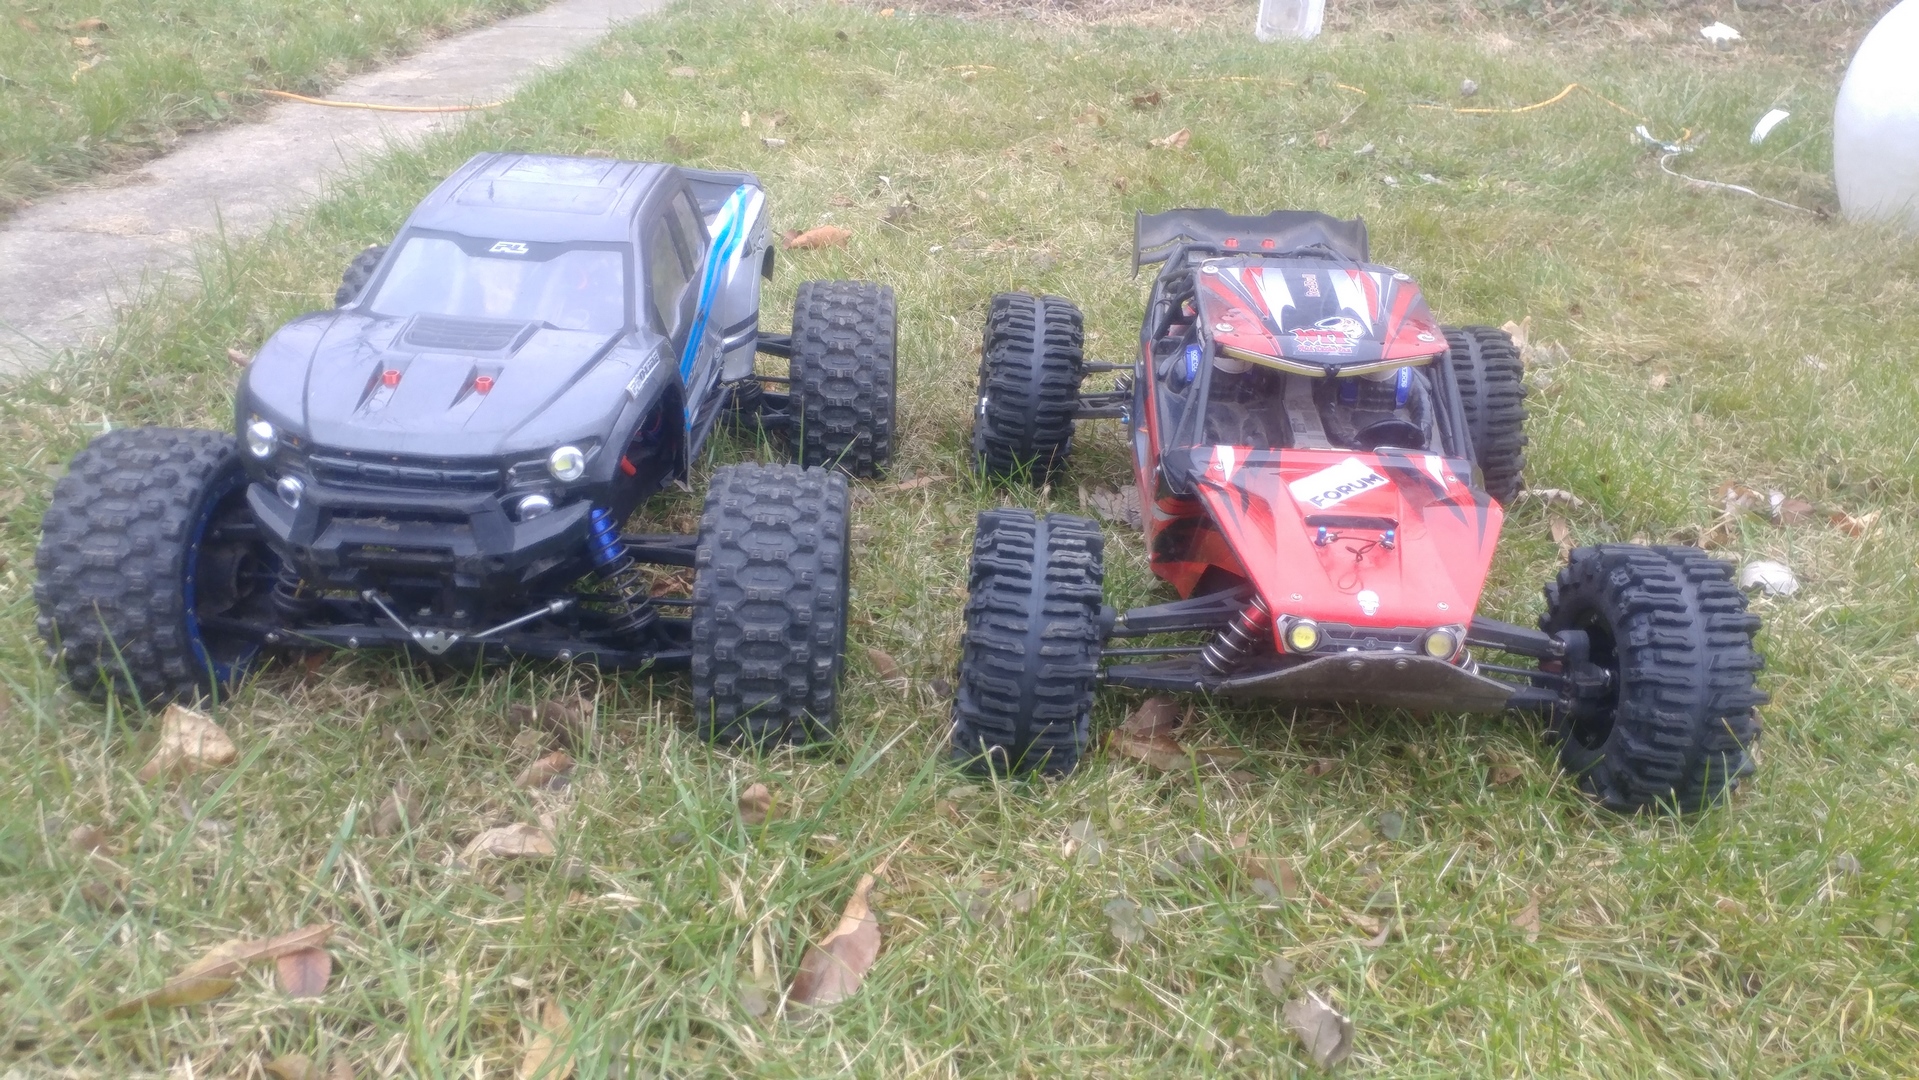 How Large Is The Arrma Zennon? #2